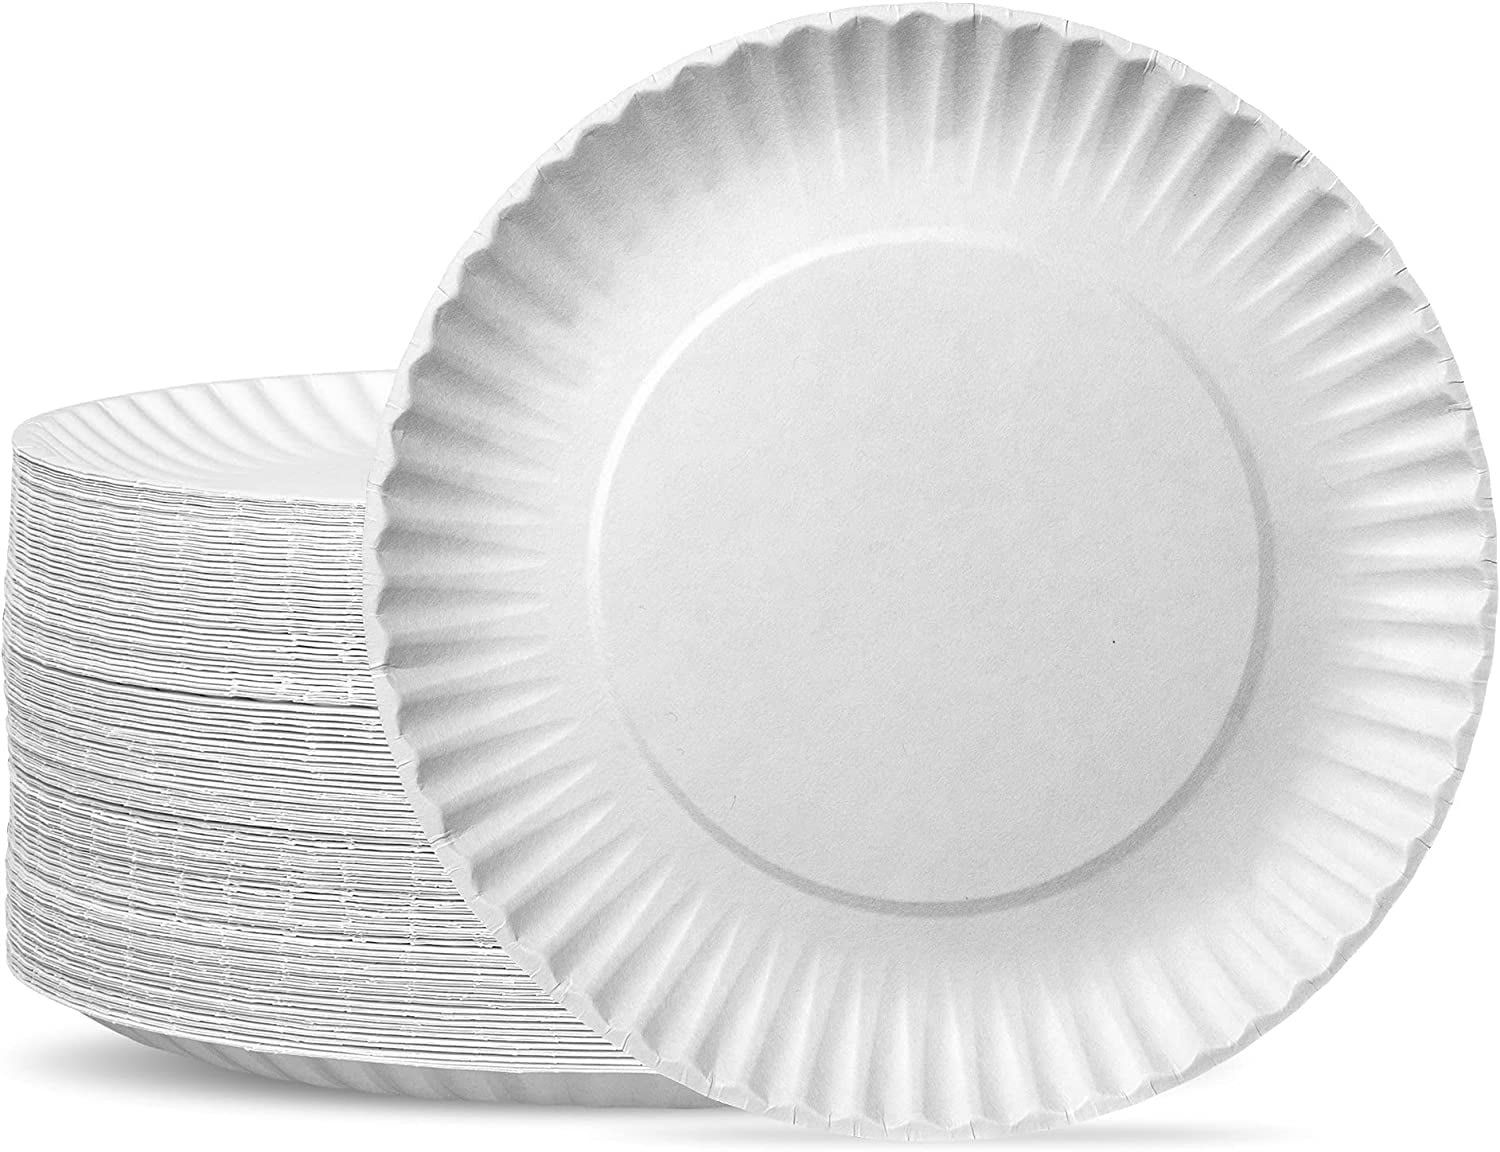 [300 Pack] Disposable White Uncoated Paper Plates, 9 inch Large